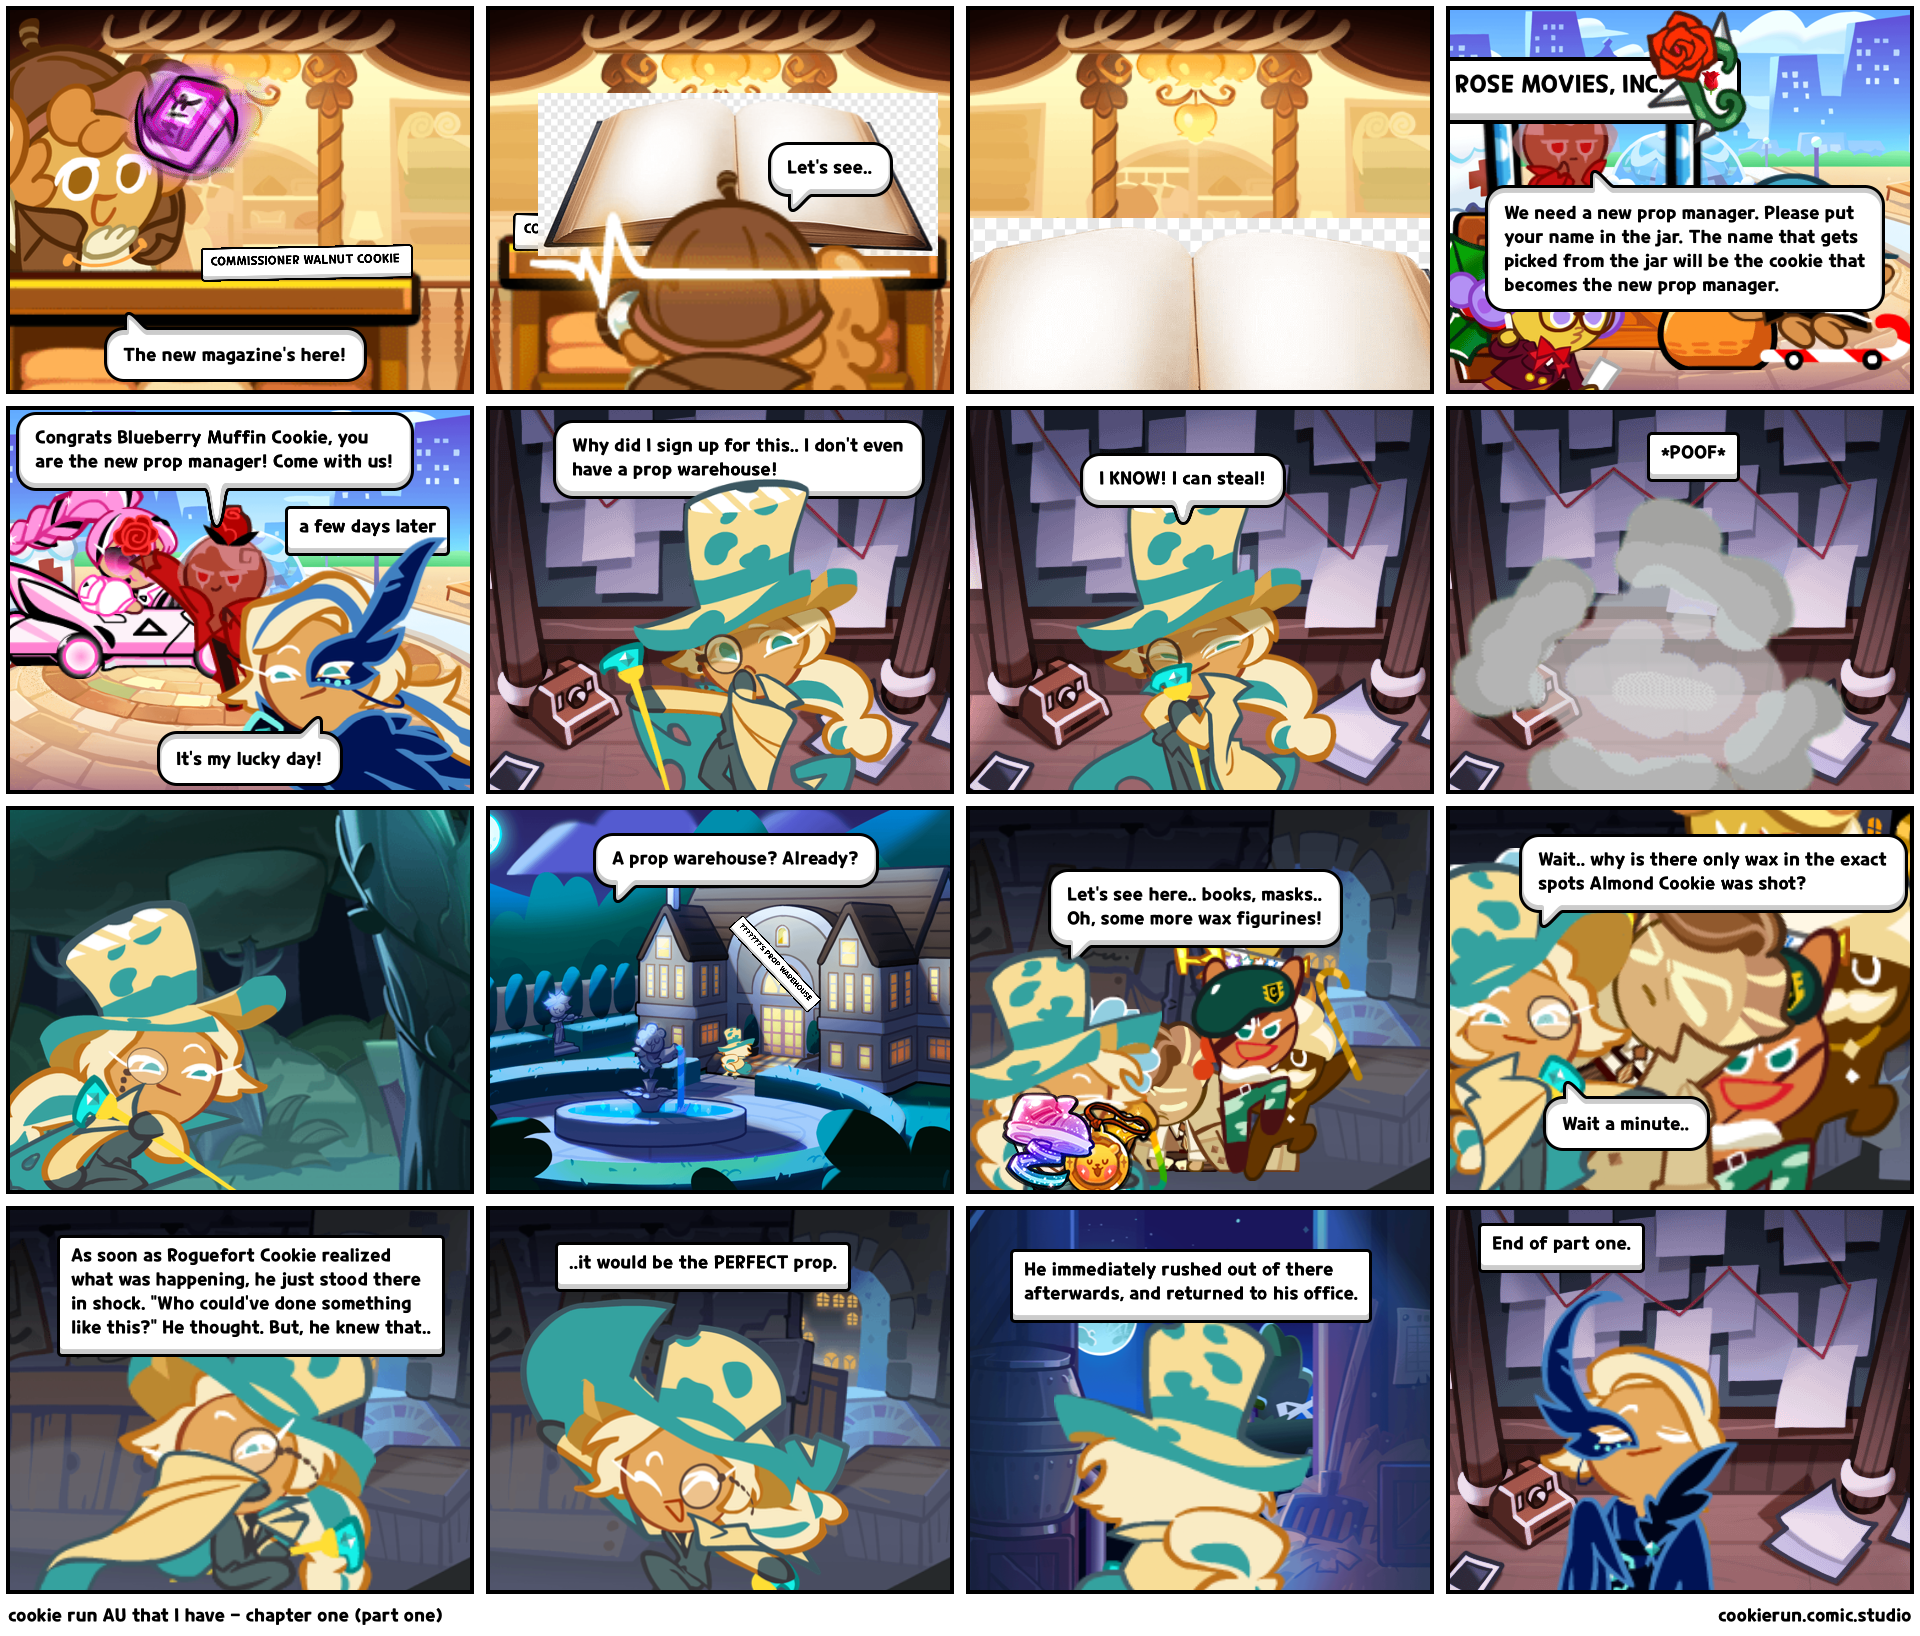 cookie run AU that I have - chapter one (part one)